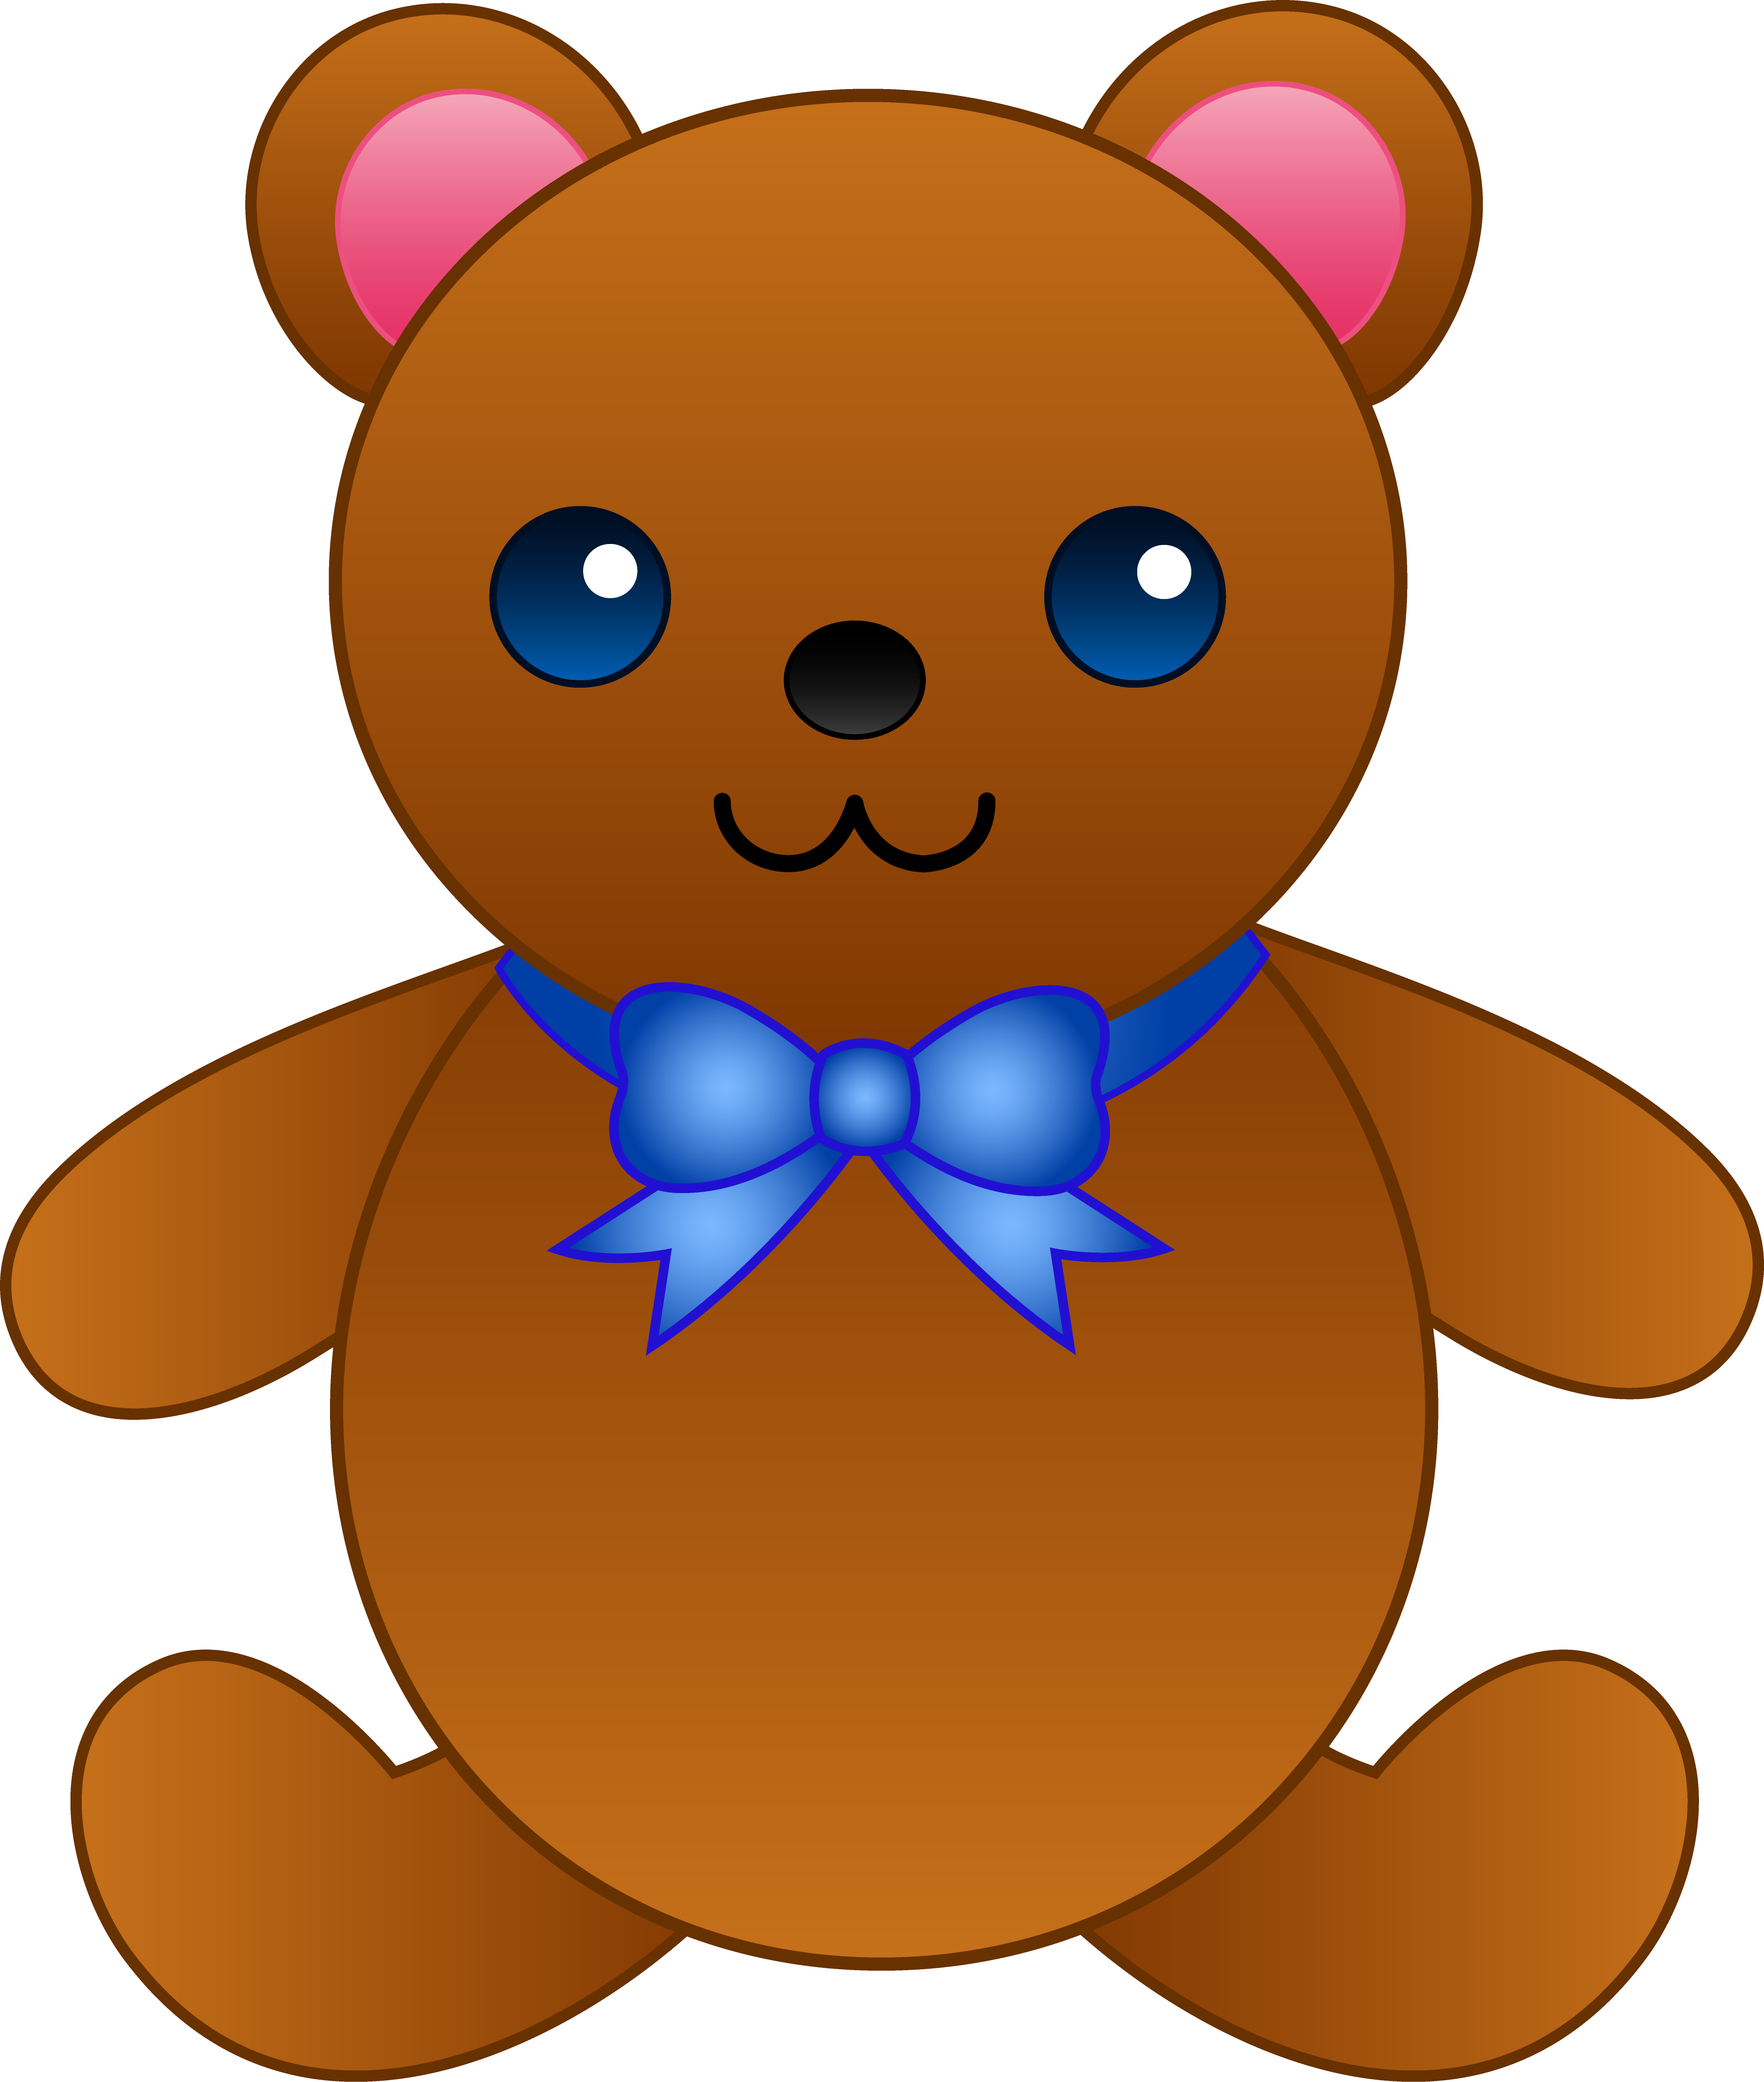 Baby Teddy Bear Clipart   Clipart Panda   Free Clipart Images